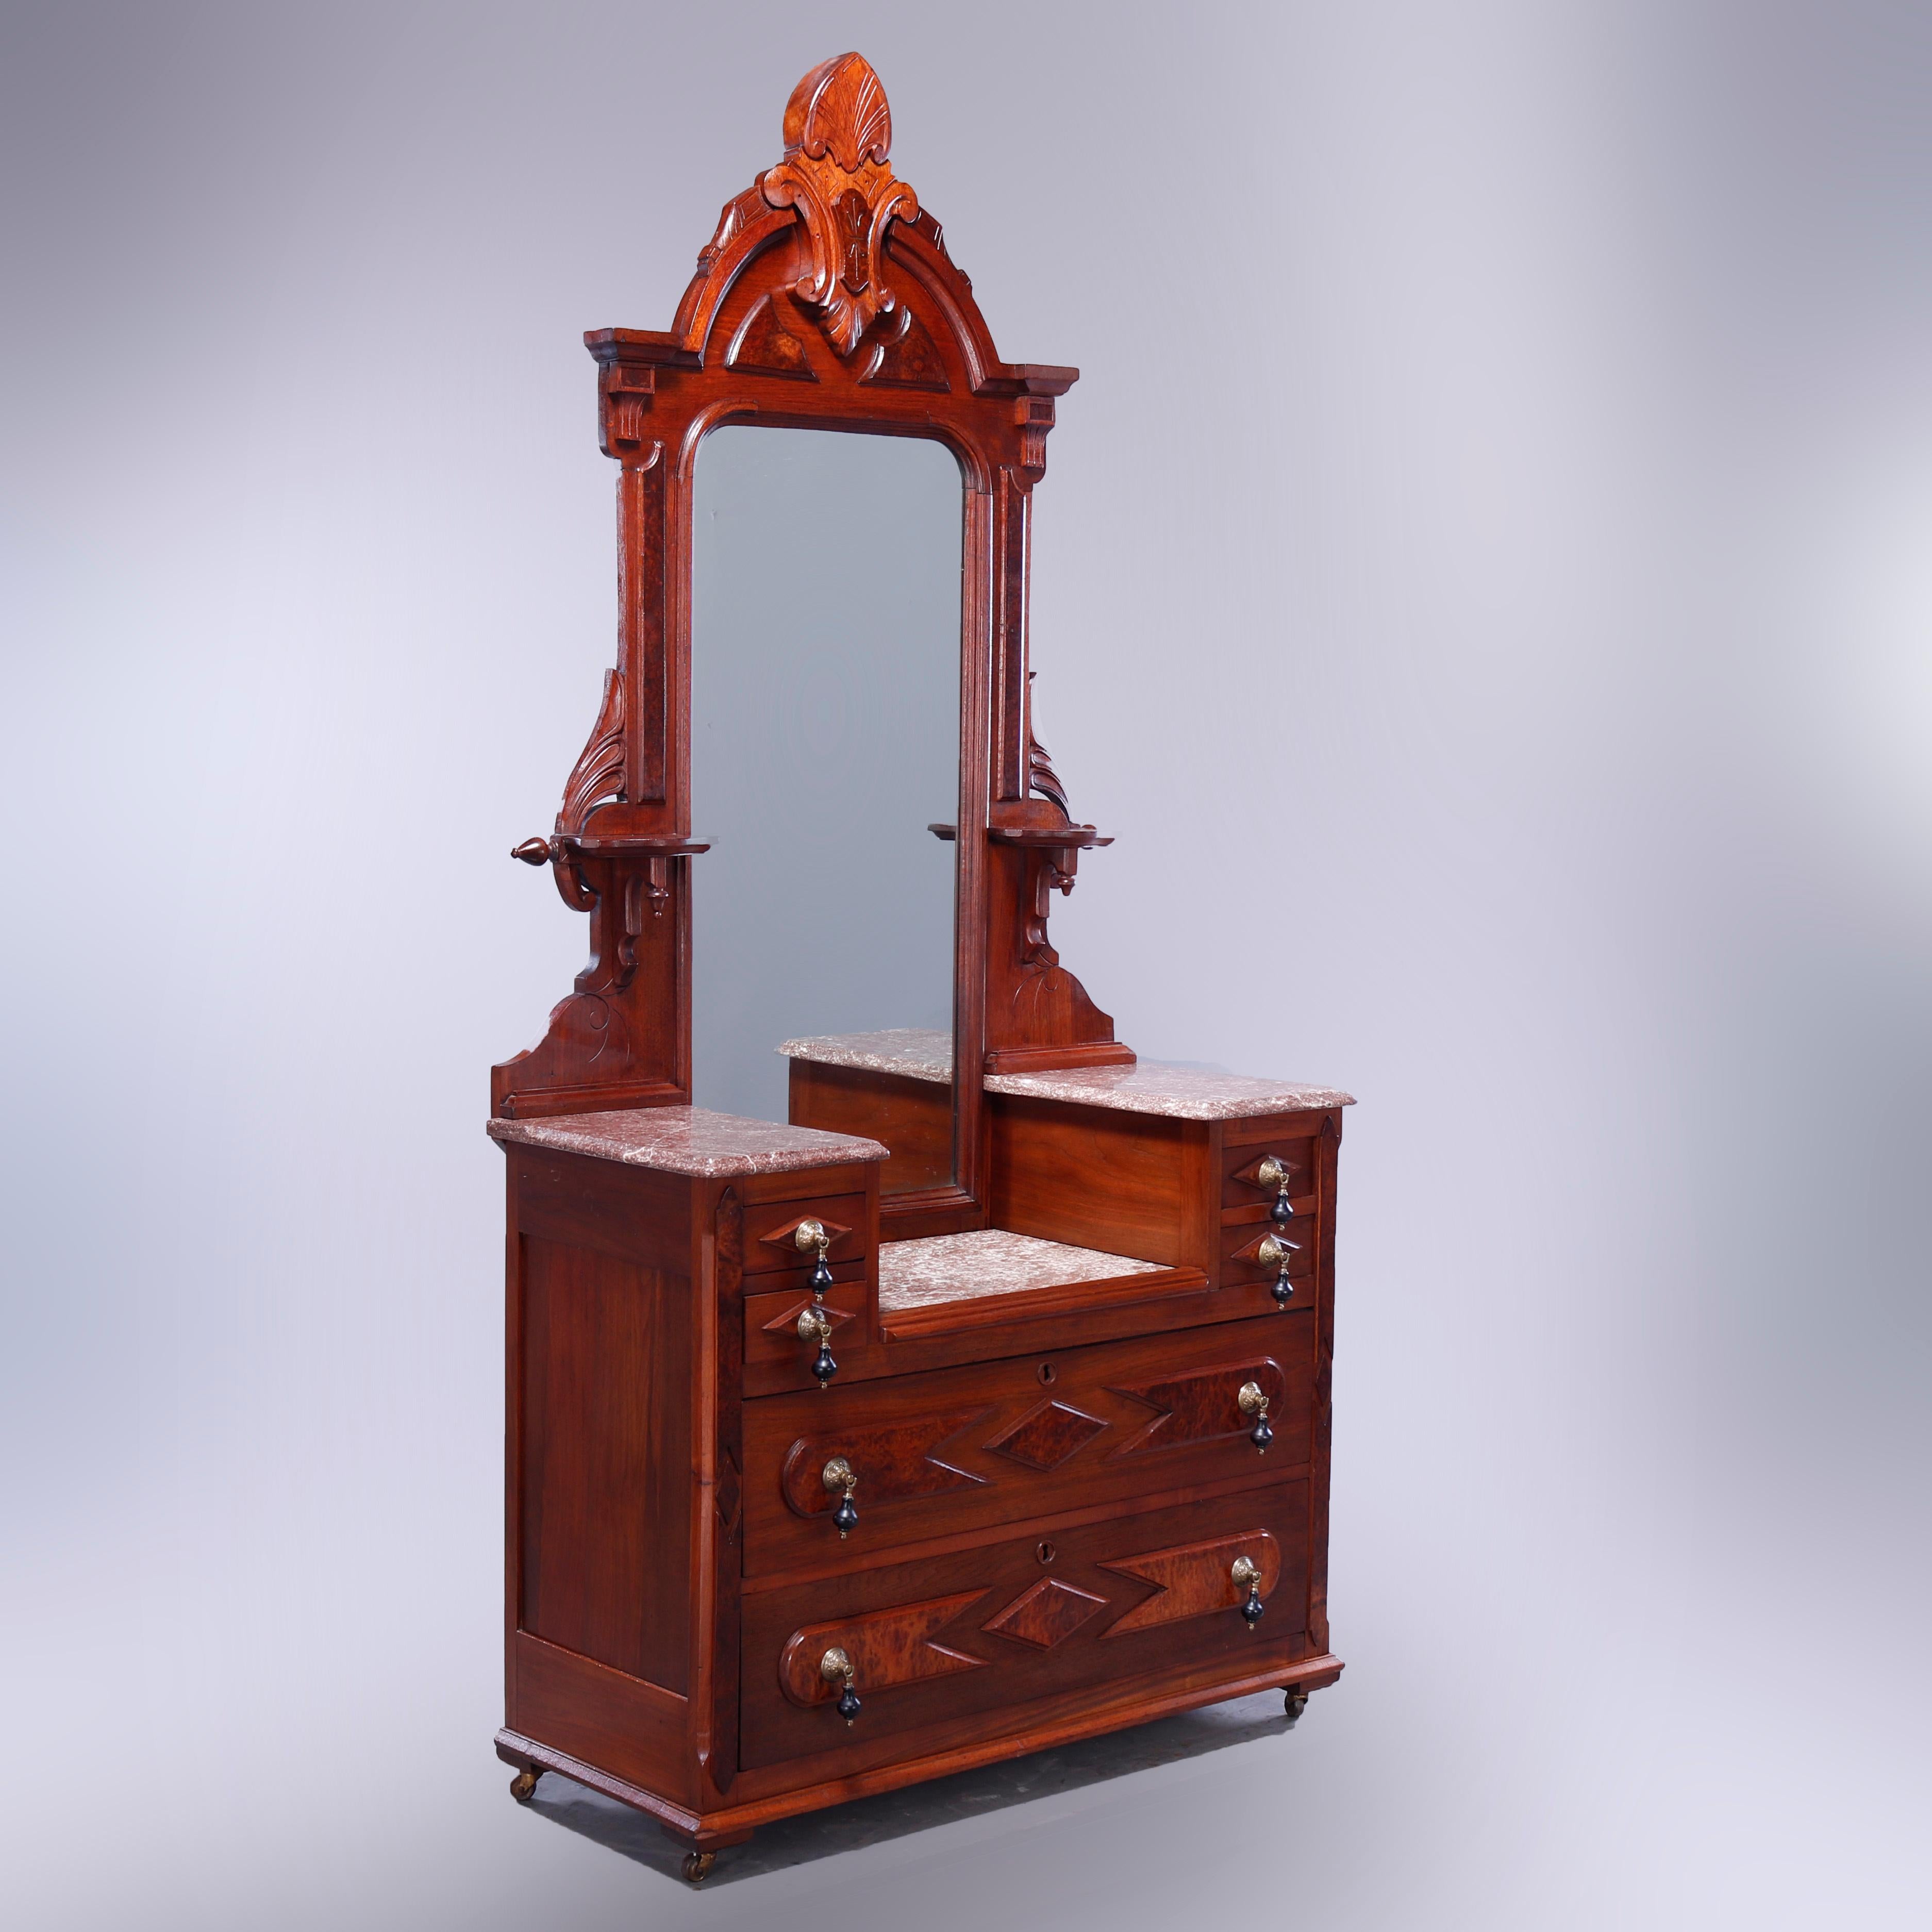 An antique Renaissance Revival dresser offers walnut construction with drop-center dressing mirror having carved stylized palmette cartouche with flanking spire finials over frame with flanking candle stands and scroll form corbels surmounting